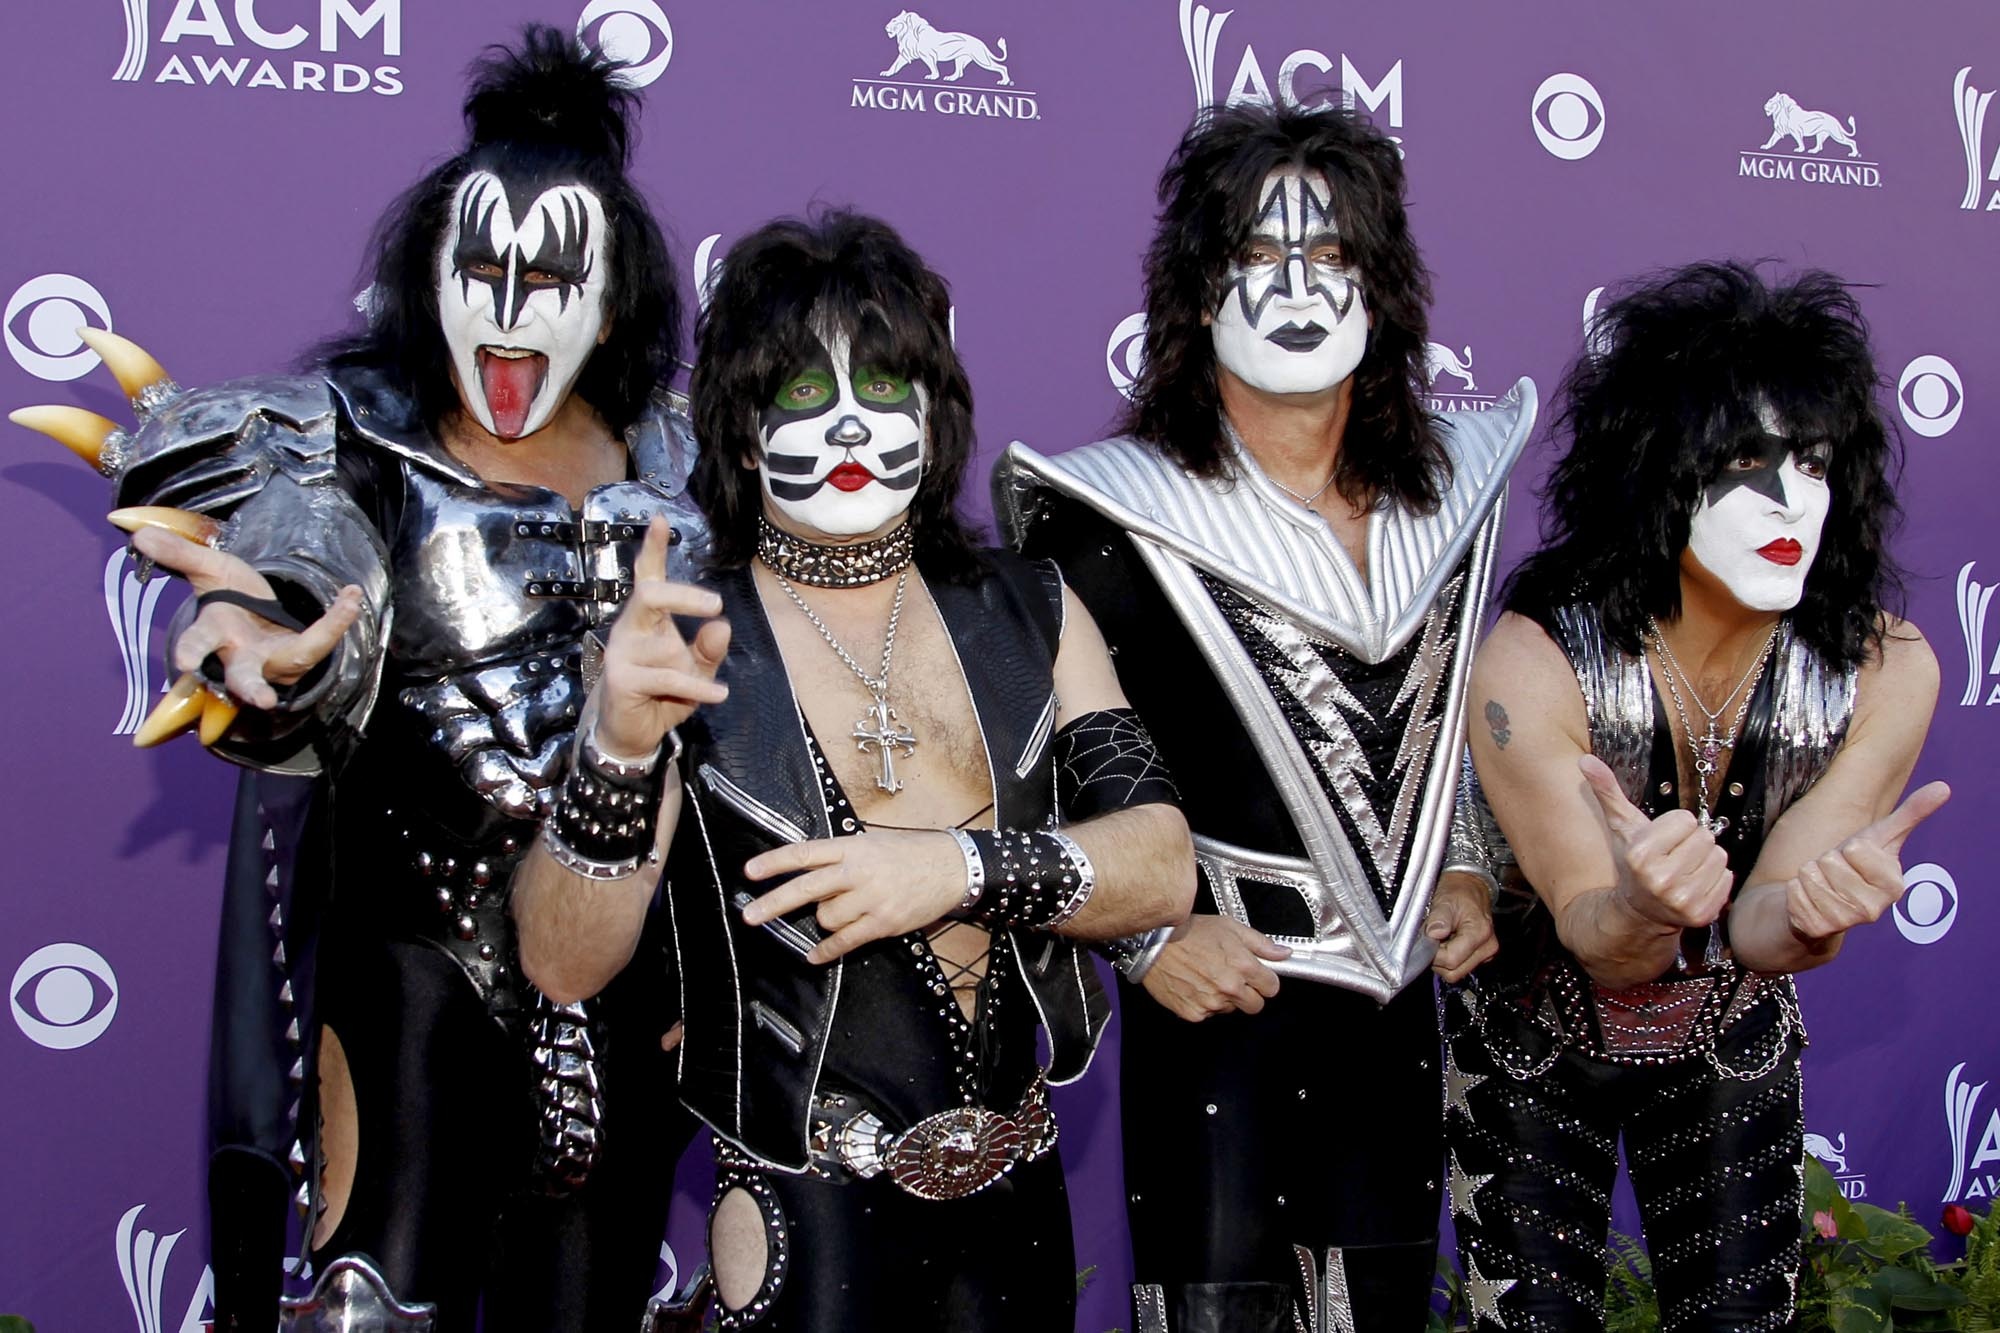 Paul Stanley, Anti-semitic accusations, Controversial claims, Band members, 2000x1340 HD Desktop